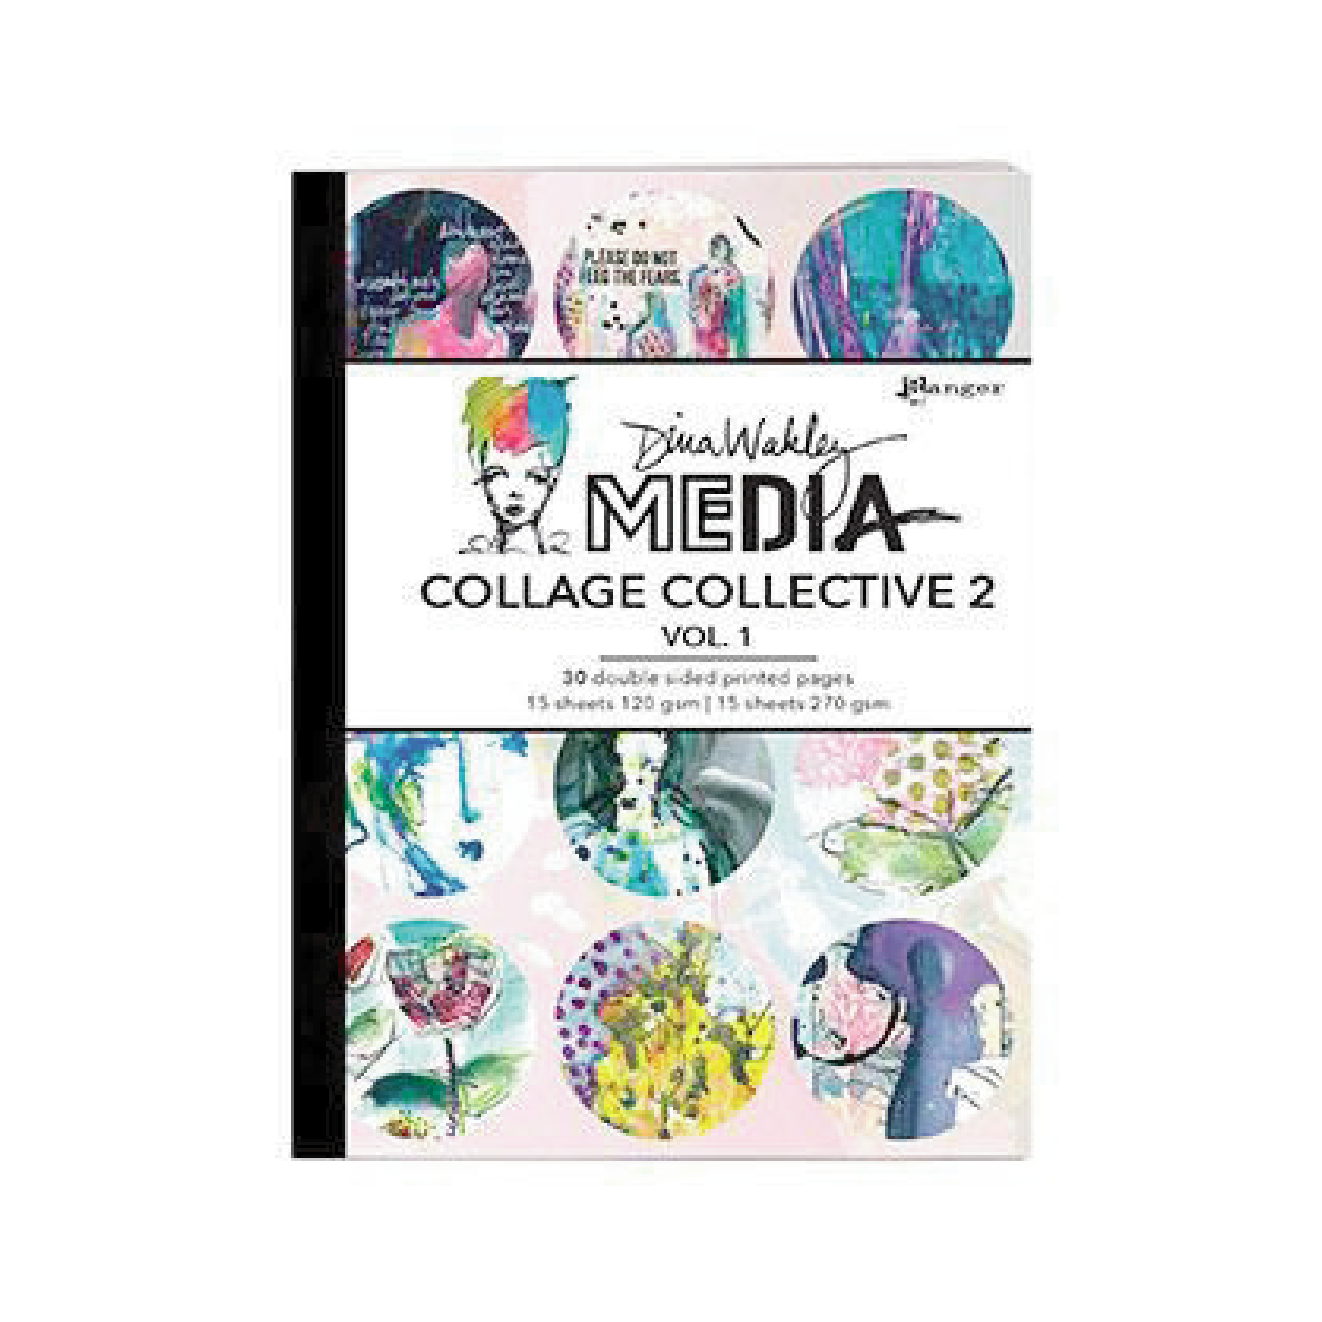 Collage Collective 2 - Vol 1